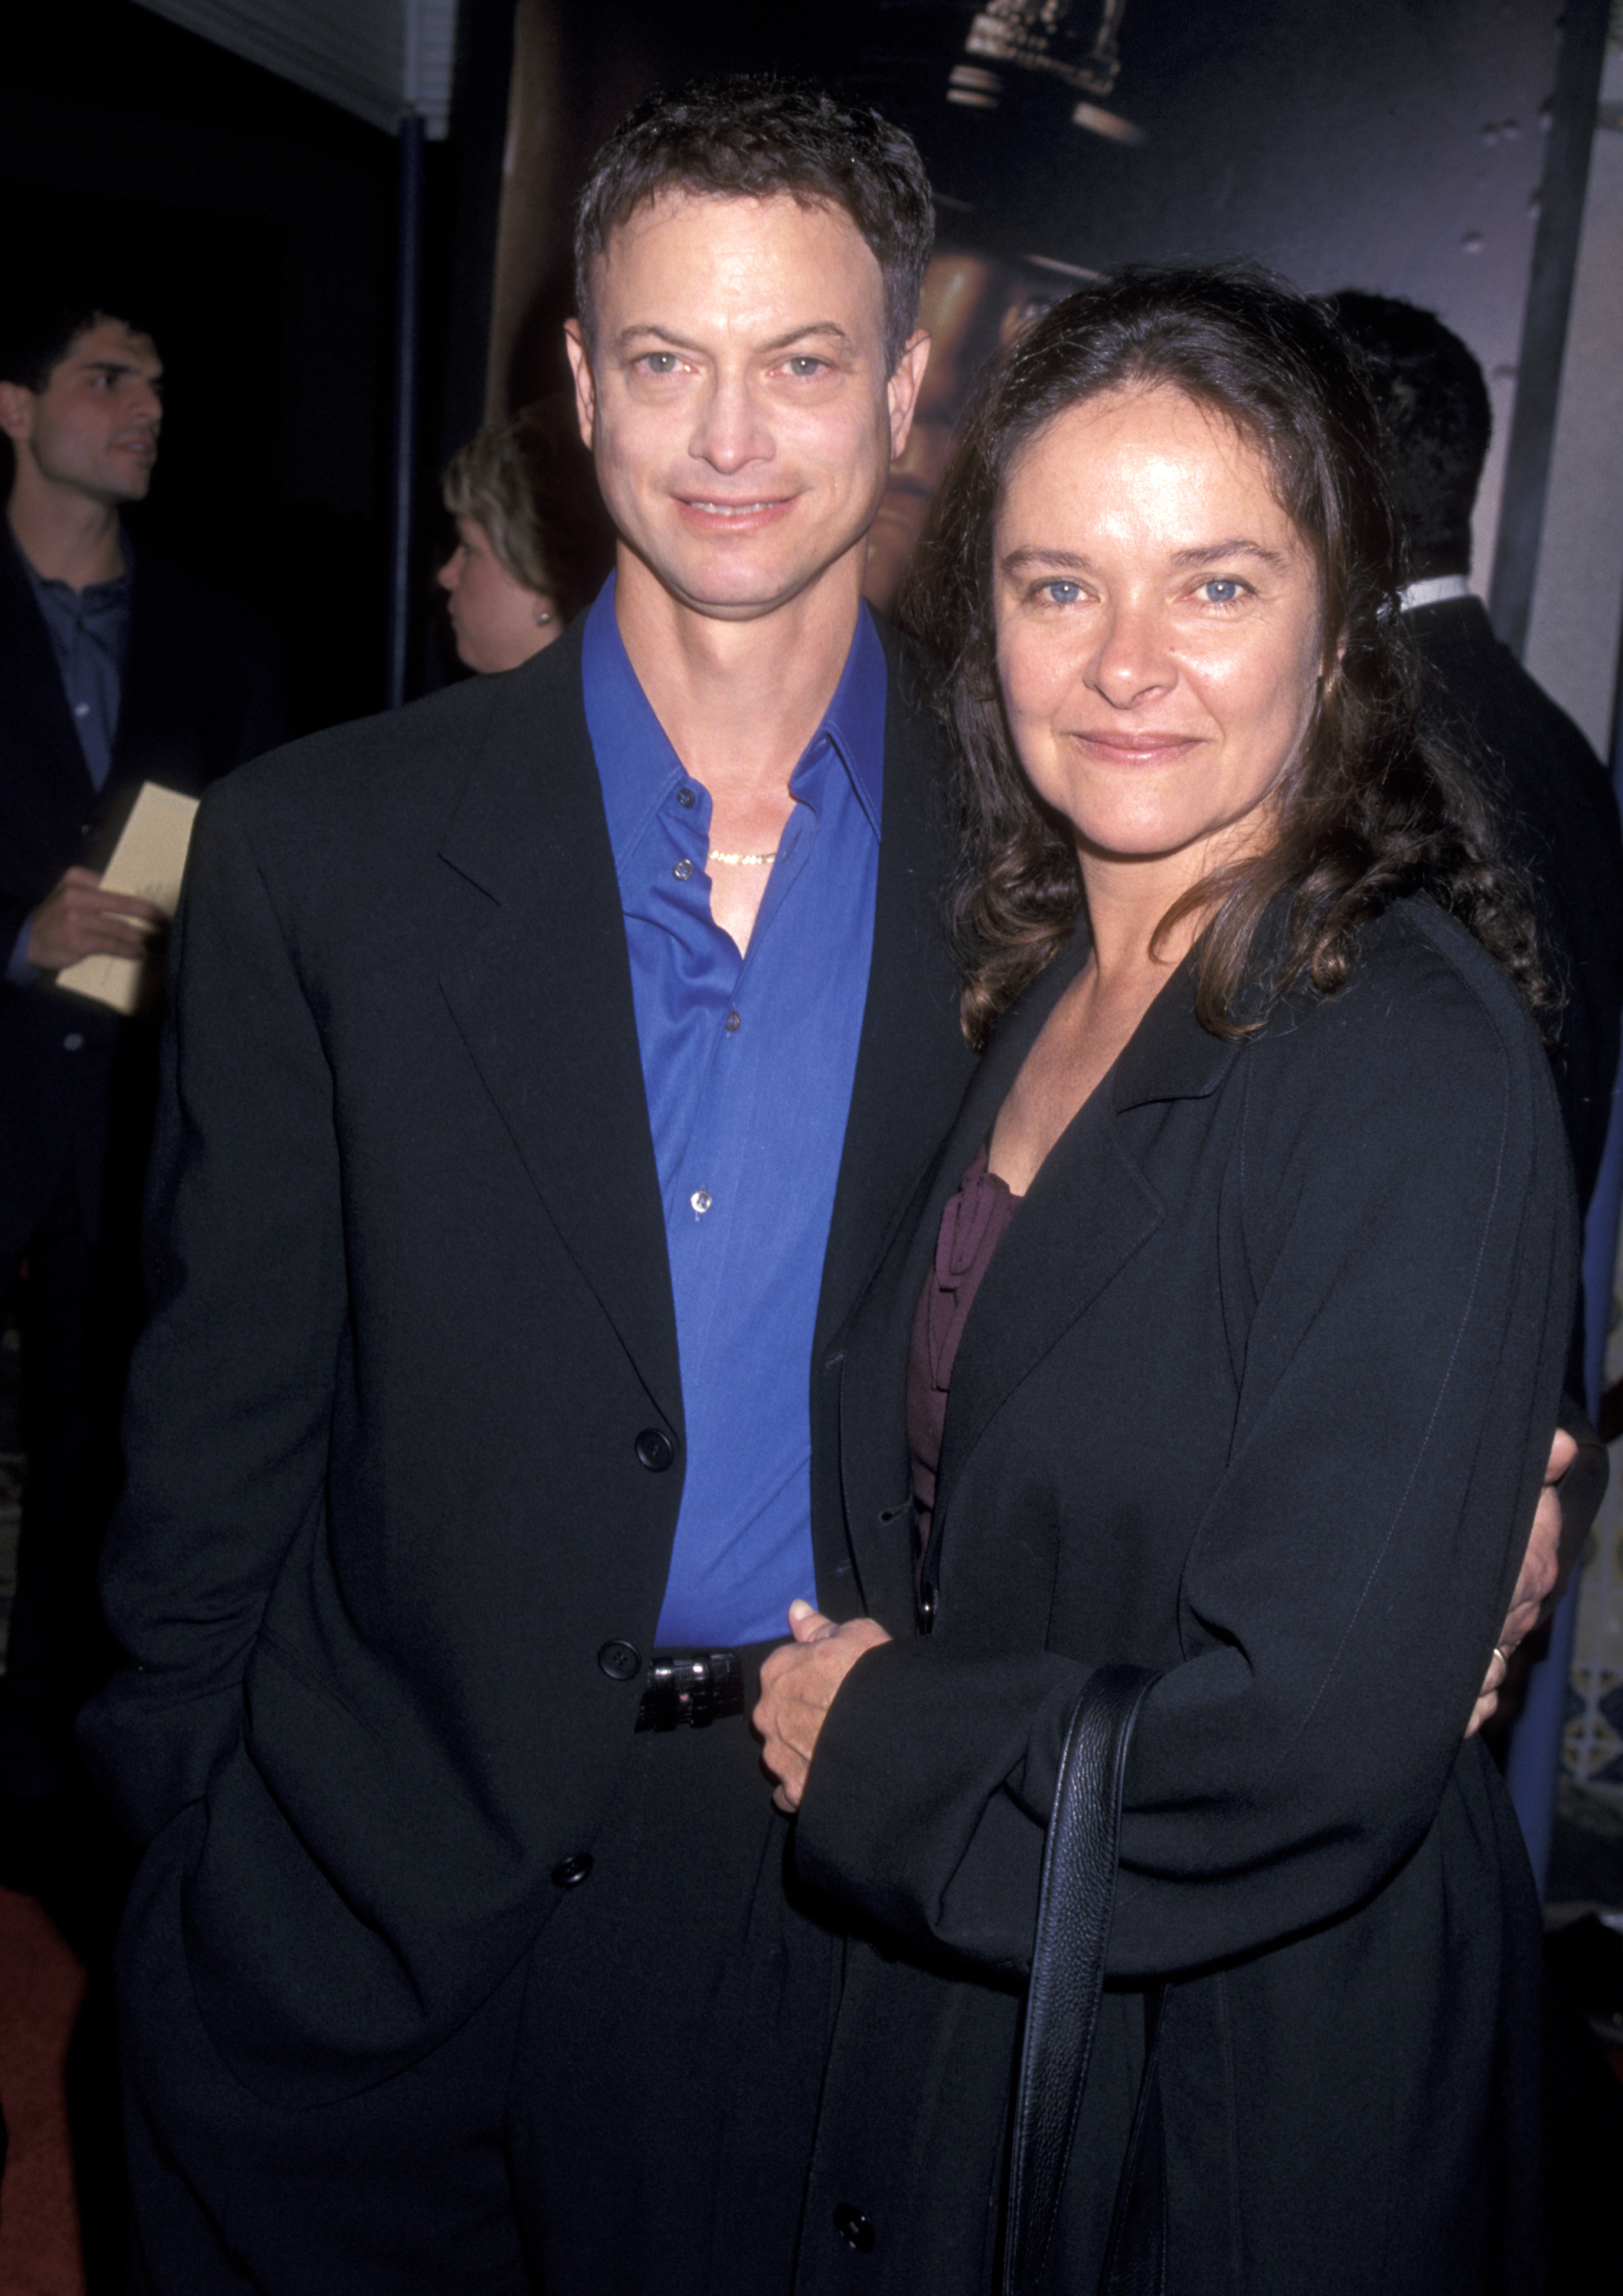 Gary Sinise and his wife Moira Harris during the benefit premiere of "The Green Mile" at Mann Village Theatre in Westwood, California | Source: Getty Images